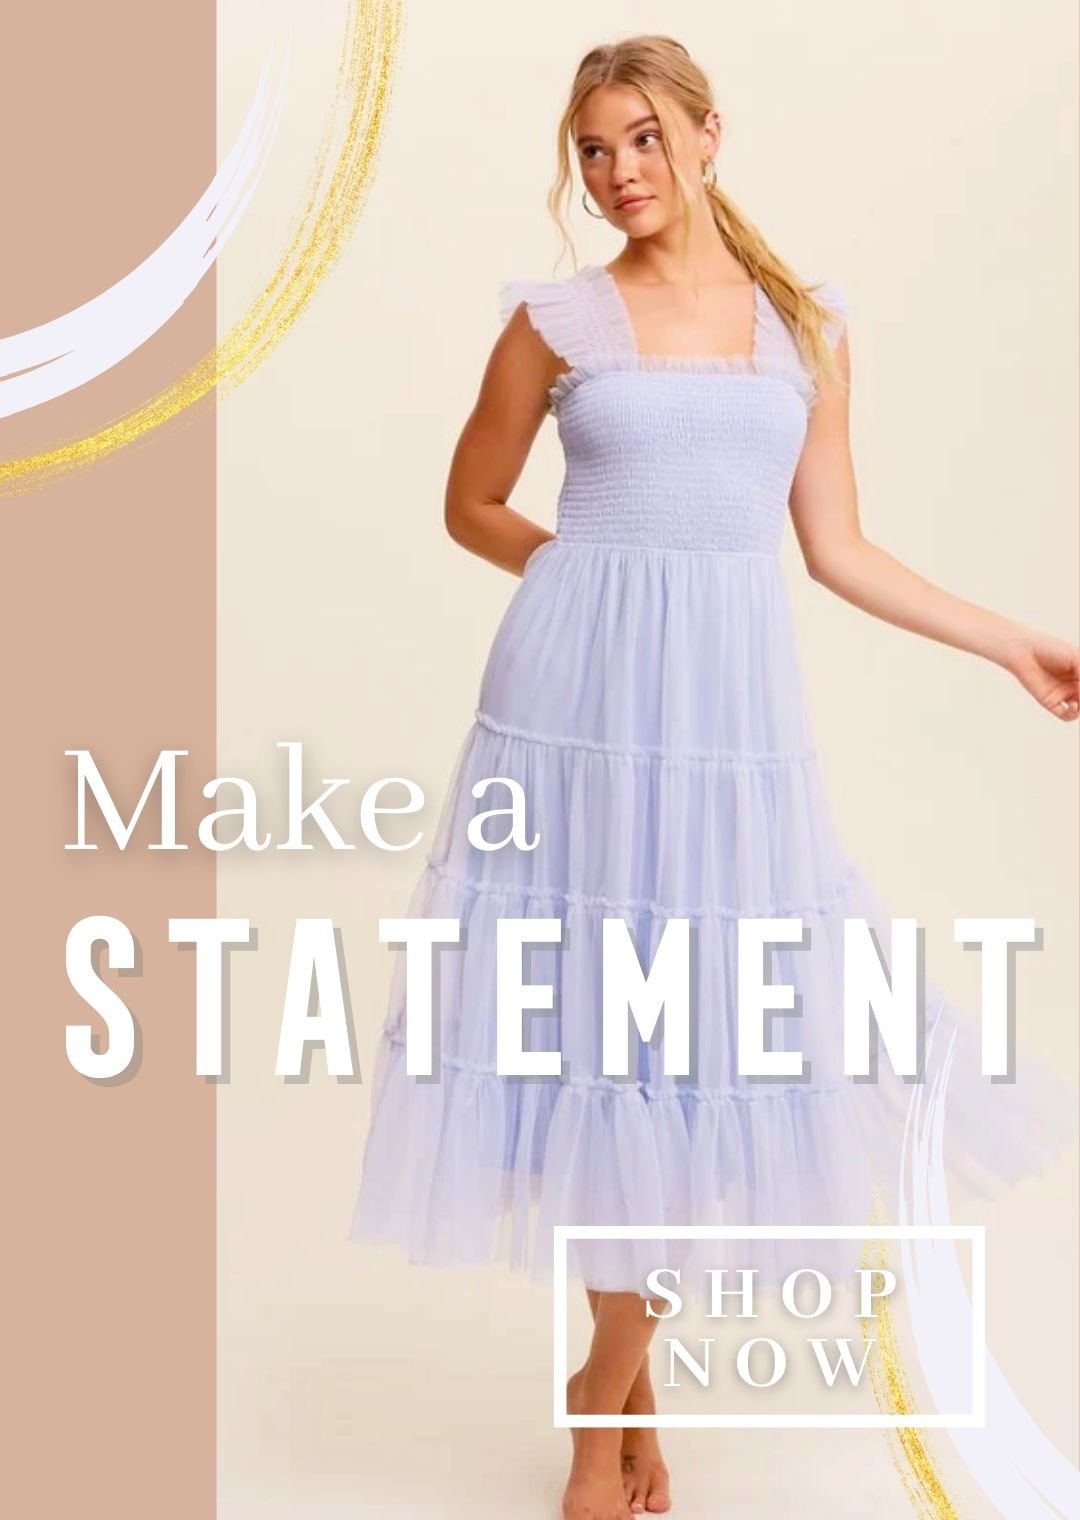 There is a woman in a light blue mesh tiered dress. The background is light tan and darker tan. There are paint graphics of light blue and yellow sparkle at the top left and bottom right. There is text that says make a statement and there is a white box that says shop now.